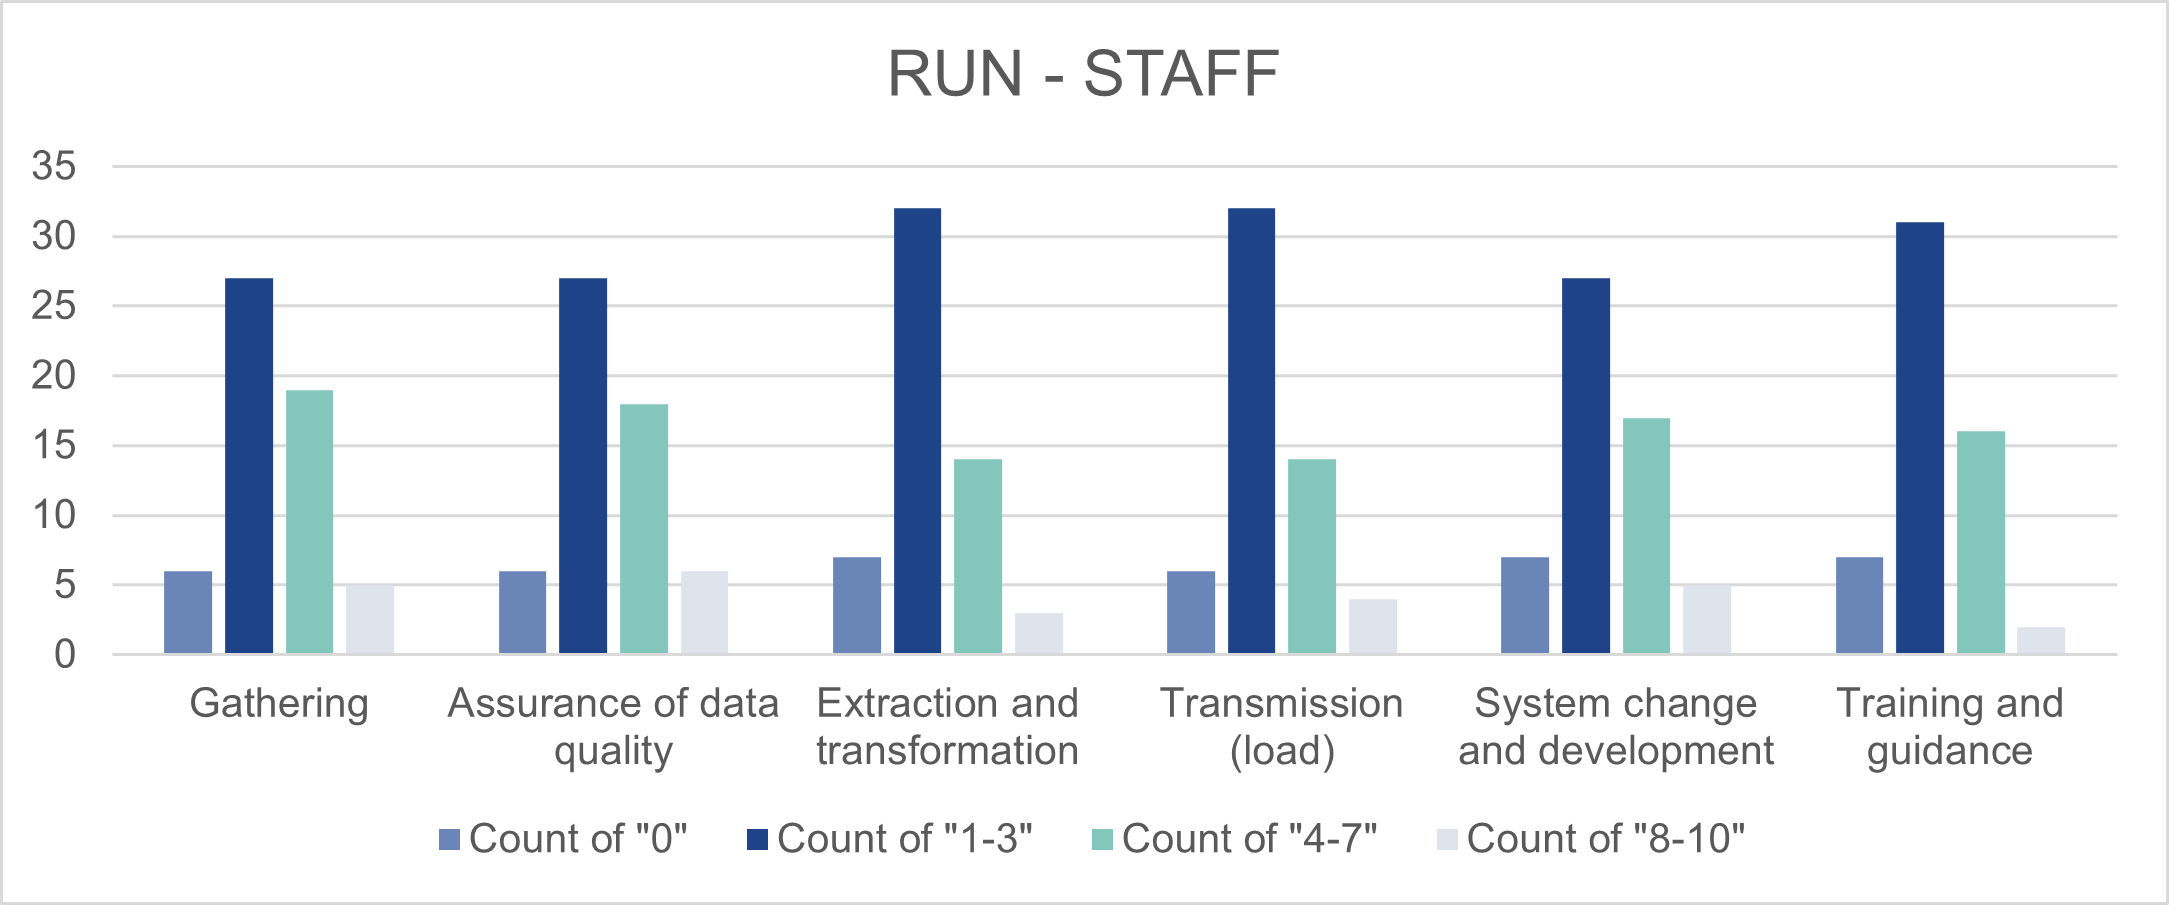 This is a bar chart. Its purpose is to show a summary assessment score for operating the new process ('Run'). 